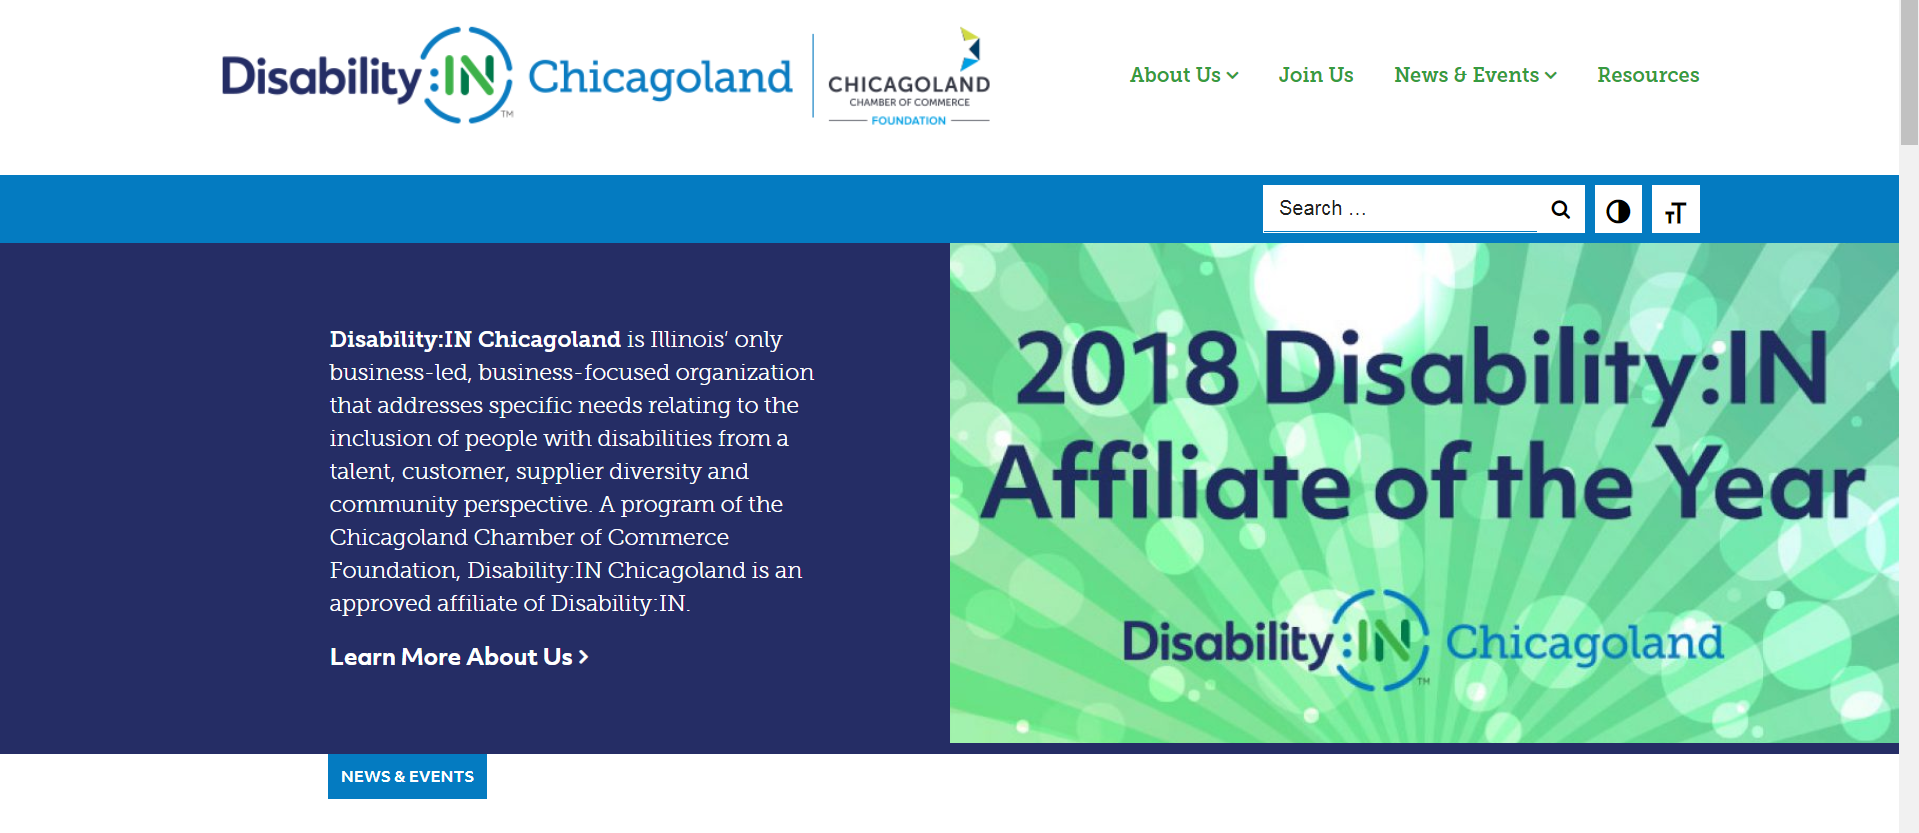 Disability:IN Chicagoland Launches New Website